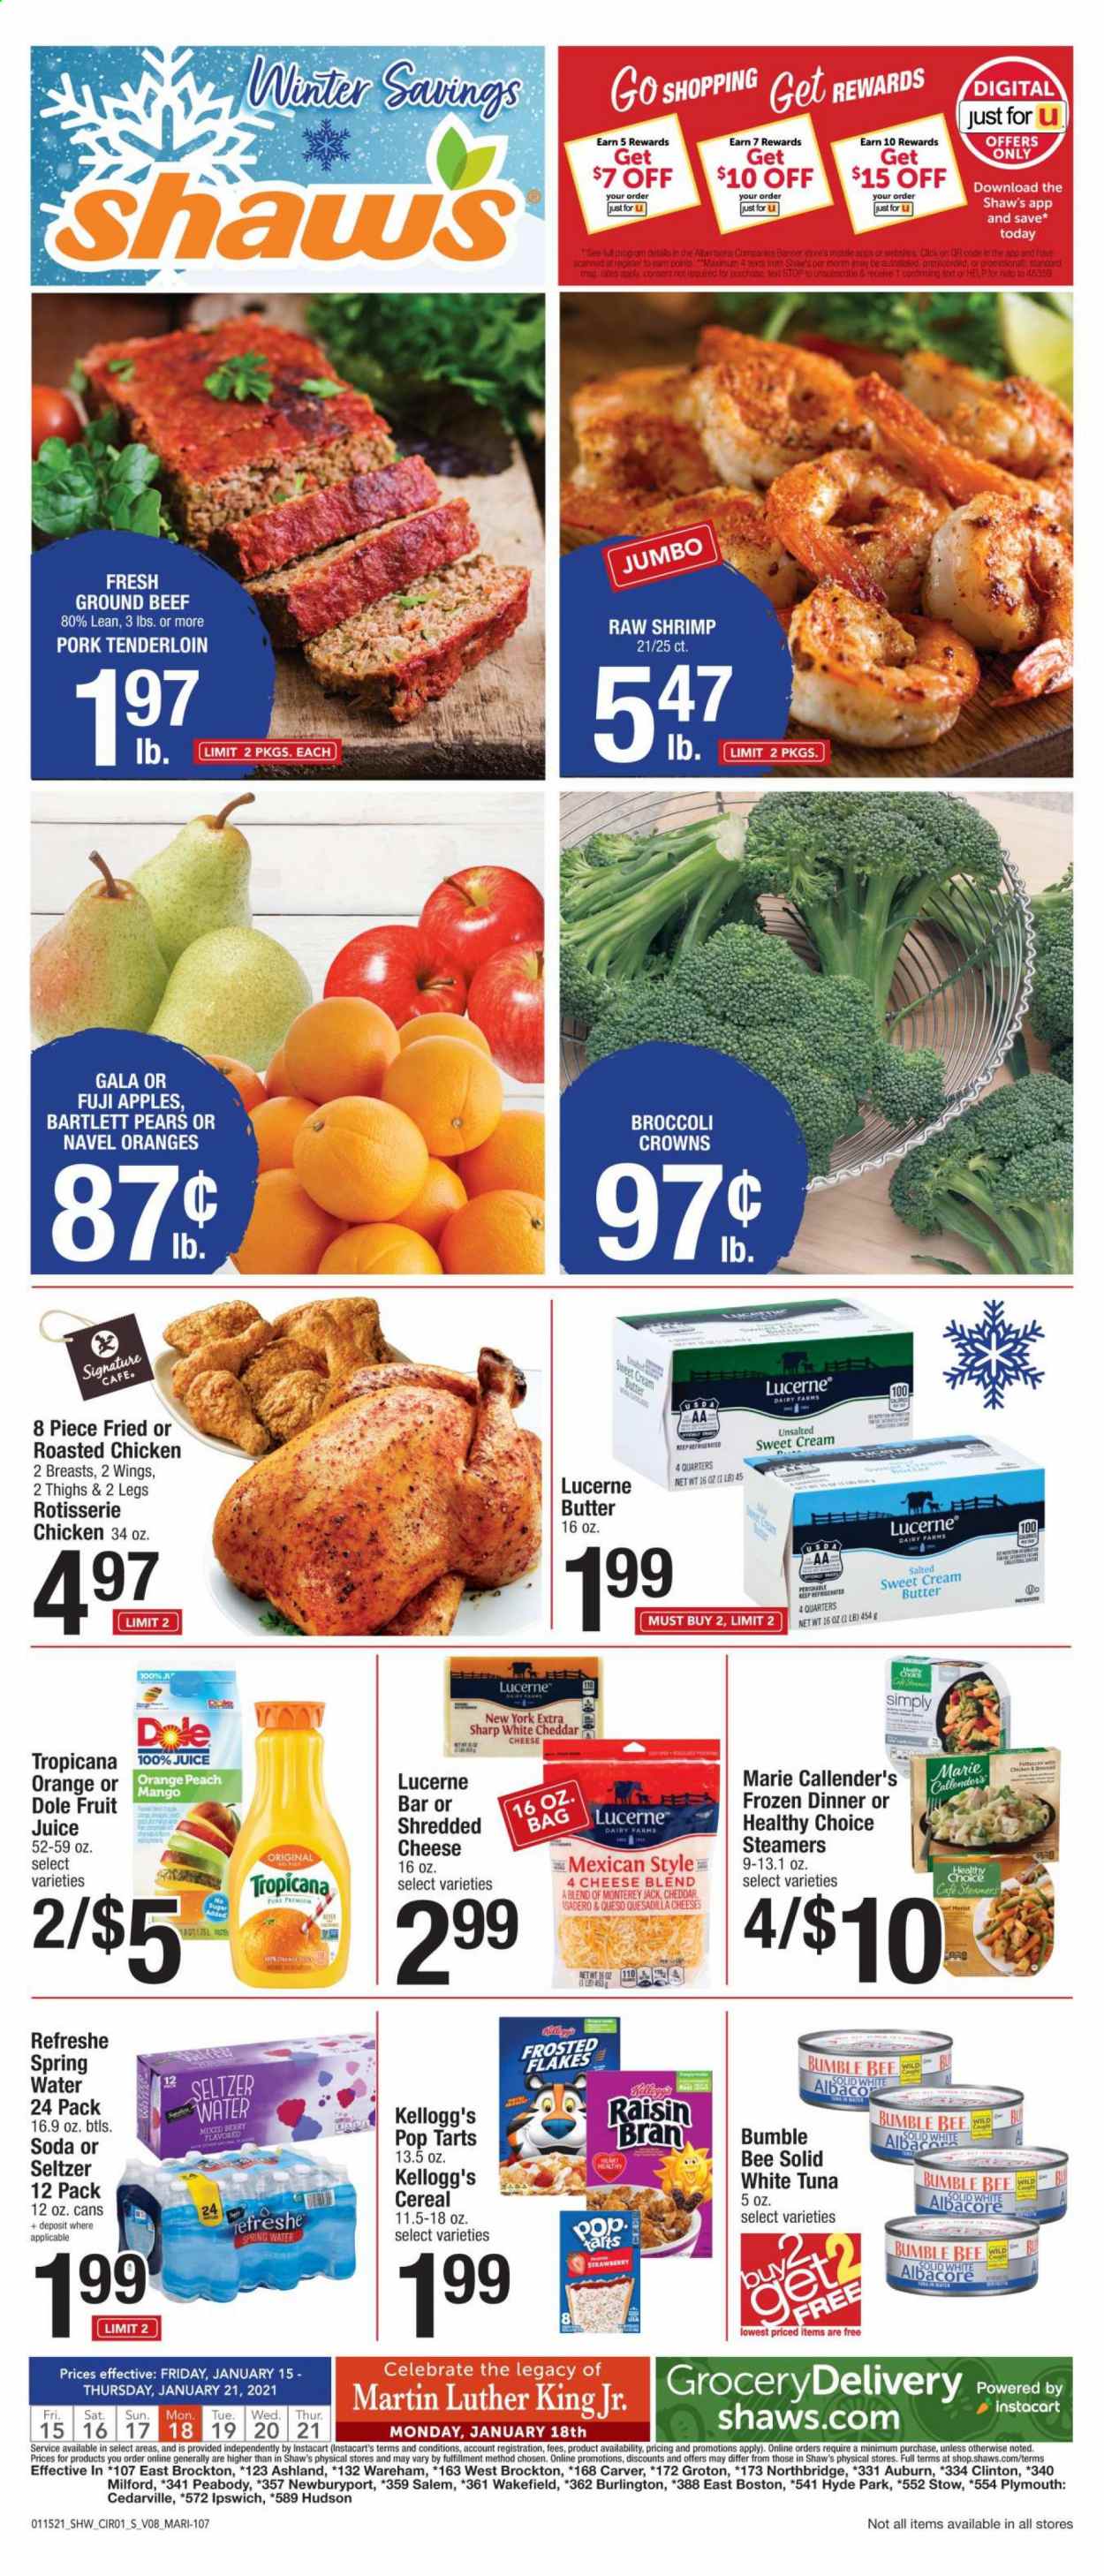 thumbnail - Shaw’s Flyer - 01/15/2021 - 01/21/2021 - Sales products - Bartlett pears, Fuji apple, Dole, apples, pears, oranges, tuna, shrimps, Healthy Choice, Marie Callender's, Monterey Jack cheese, shredded cheese, cheddar, butter, mango, Kellogg's, Pop-Tarts, cereals, Frosted Flakes, Raisin Bran, soda, juice, fruit juice, seltzer water, spring water, beef meat, ground beef, pork meat, pork tenderloin, Sharp. Page 1.